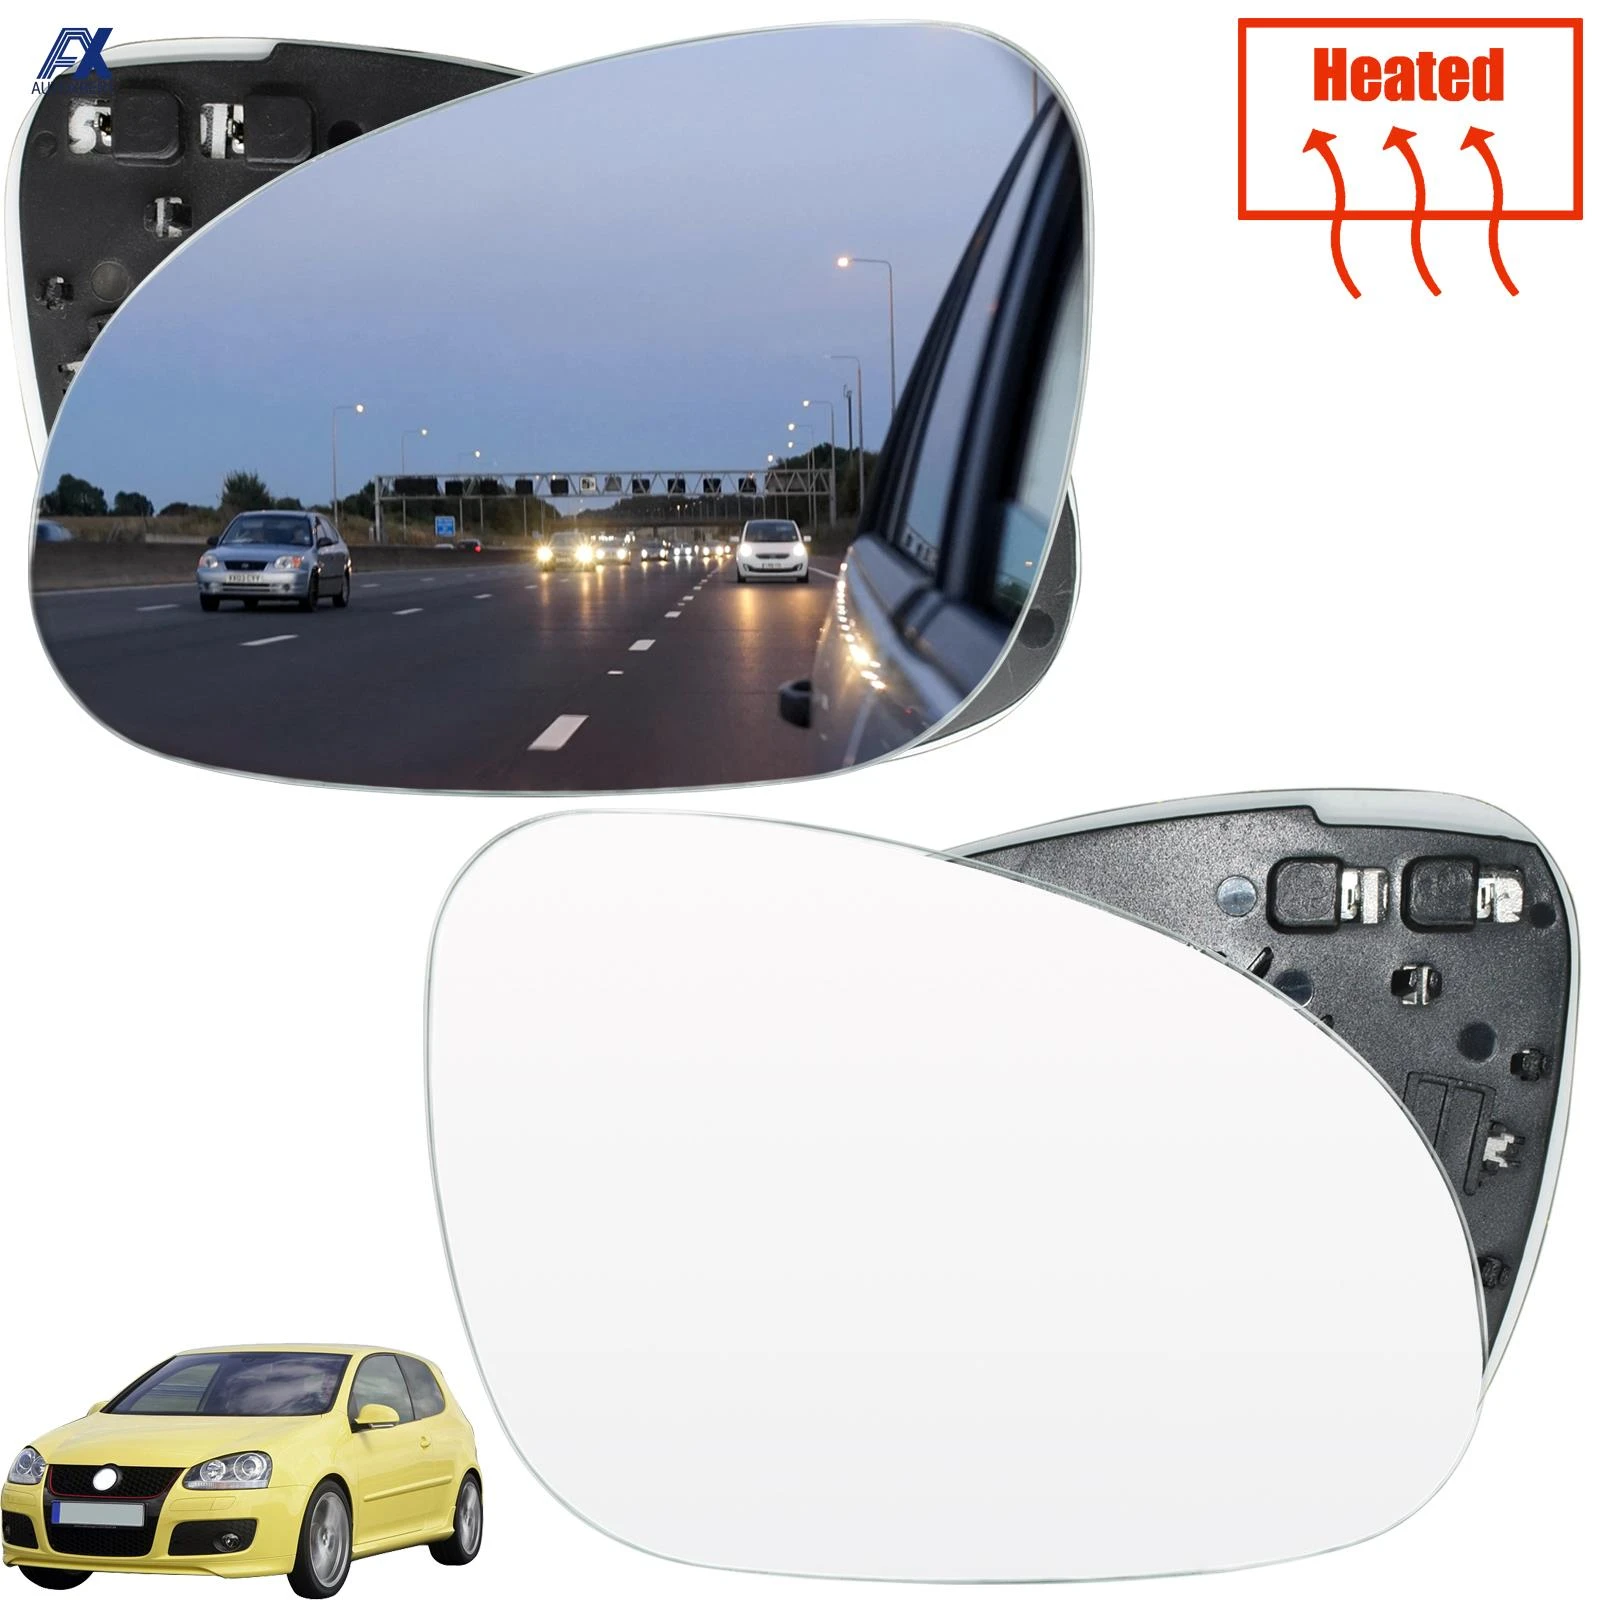 MIRROR GLASS FOR VOLKSWAGEN EOS 2006-2008 HEATED ASPHERICAL RIGHT SIDE 